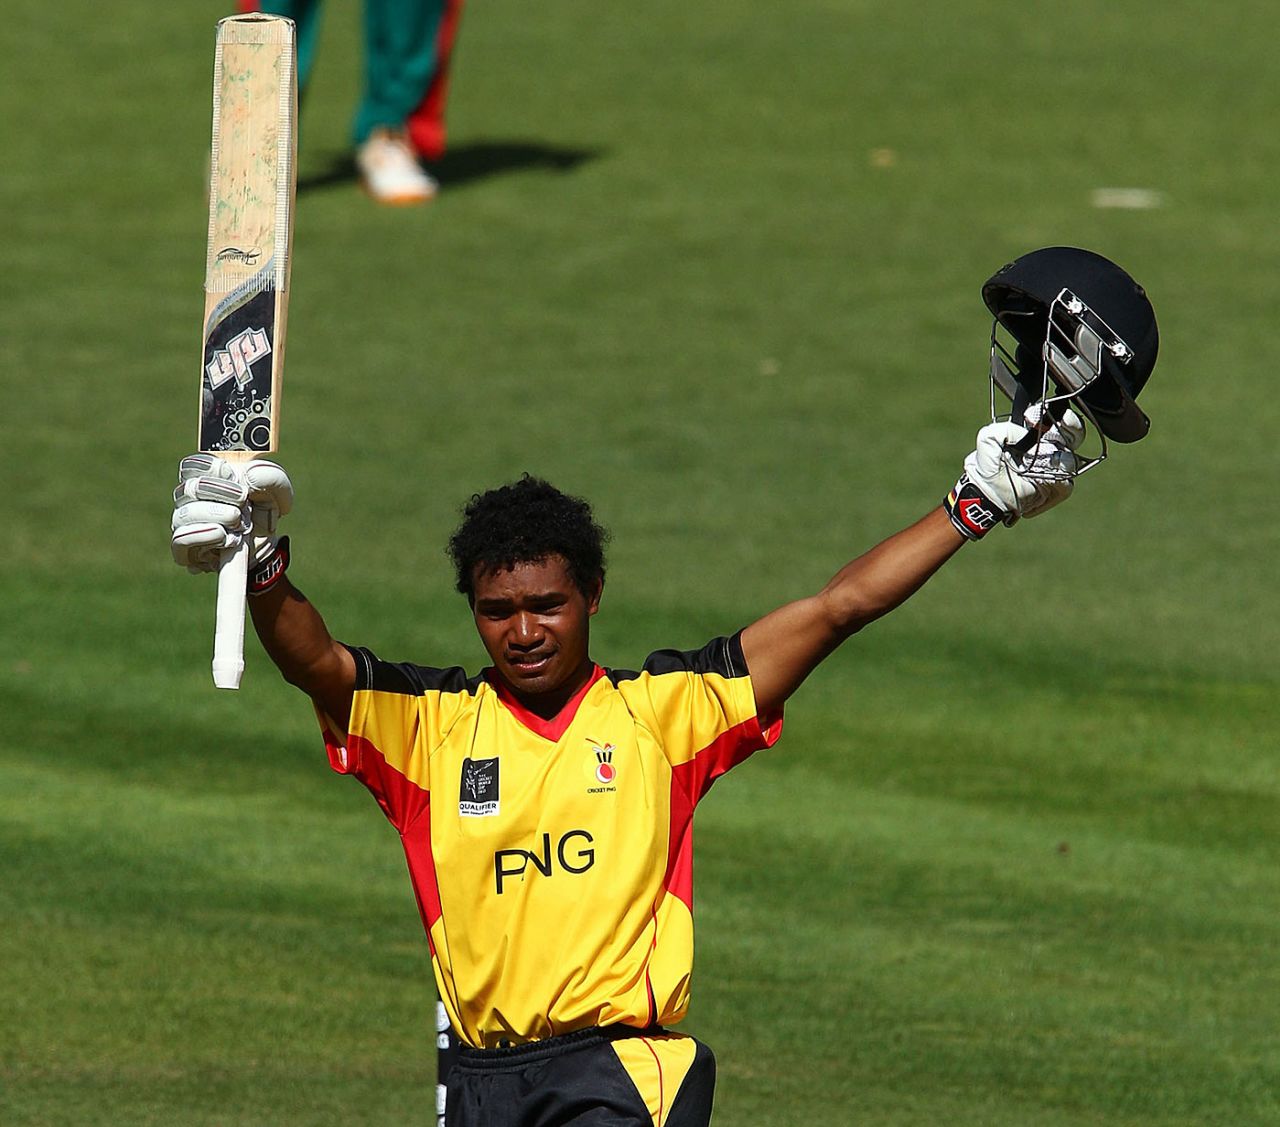 Lega Siaka acknowledges the crowd after reaching a maiden century, Kenya v Papua New Guinea, World Cup 2015 qualifiers, New Plymouth, January 13, 2014